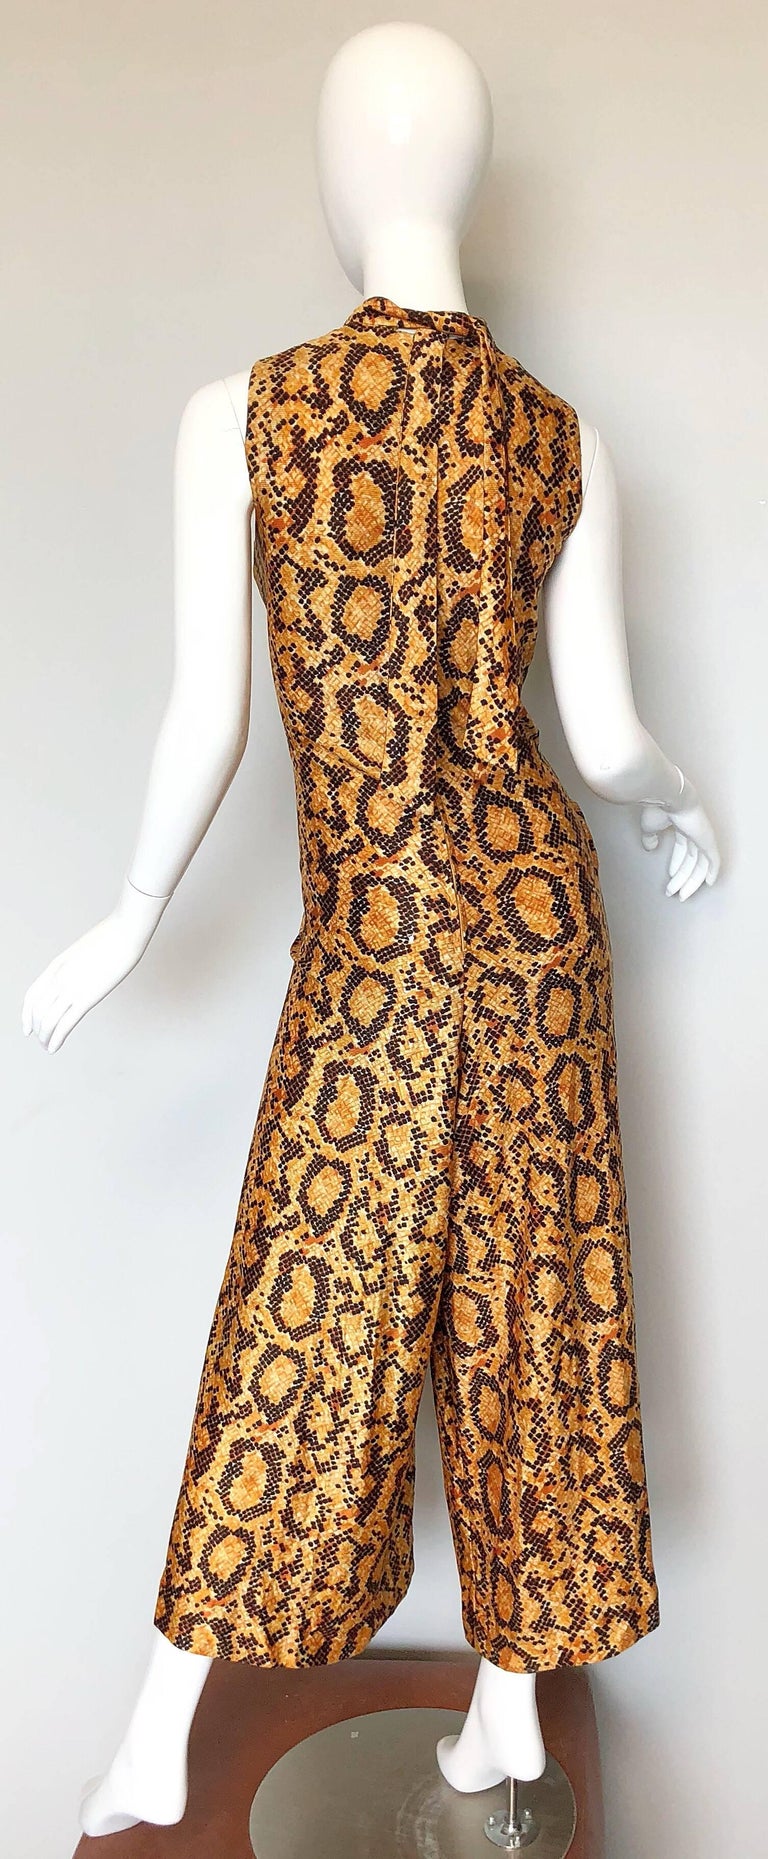 I Magnin Early 1970s Snakeskin Animal Print Wide Palazzo Leg Vintage Jumpsuit In Excellent Condition For Sale In San Diego, CA